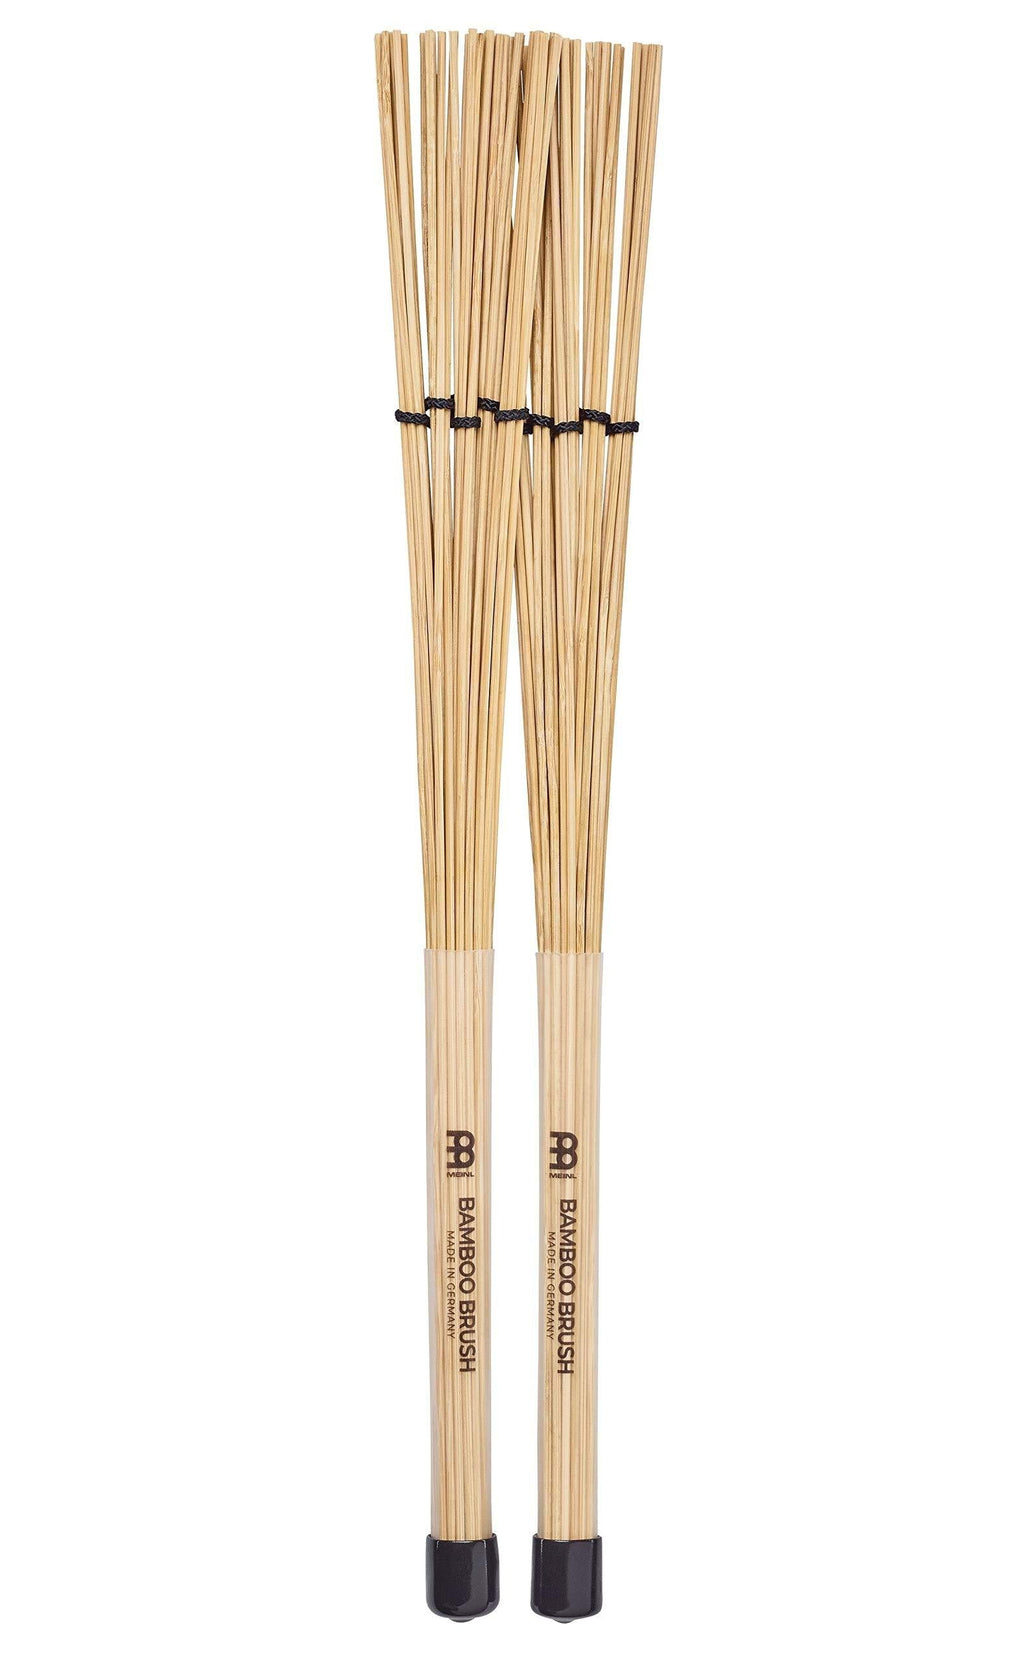 Meinl Stick & Brush Bamboo Brush with Fanned Dowels and Adjustable Rings, Standard Size - MADE IN GERMANY (SB205)